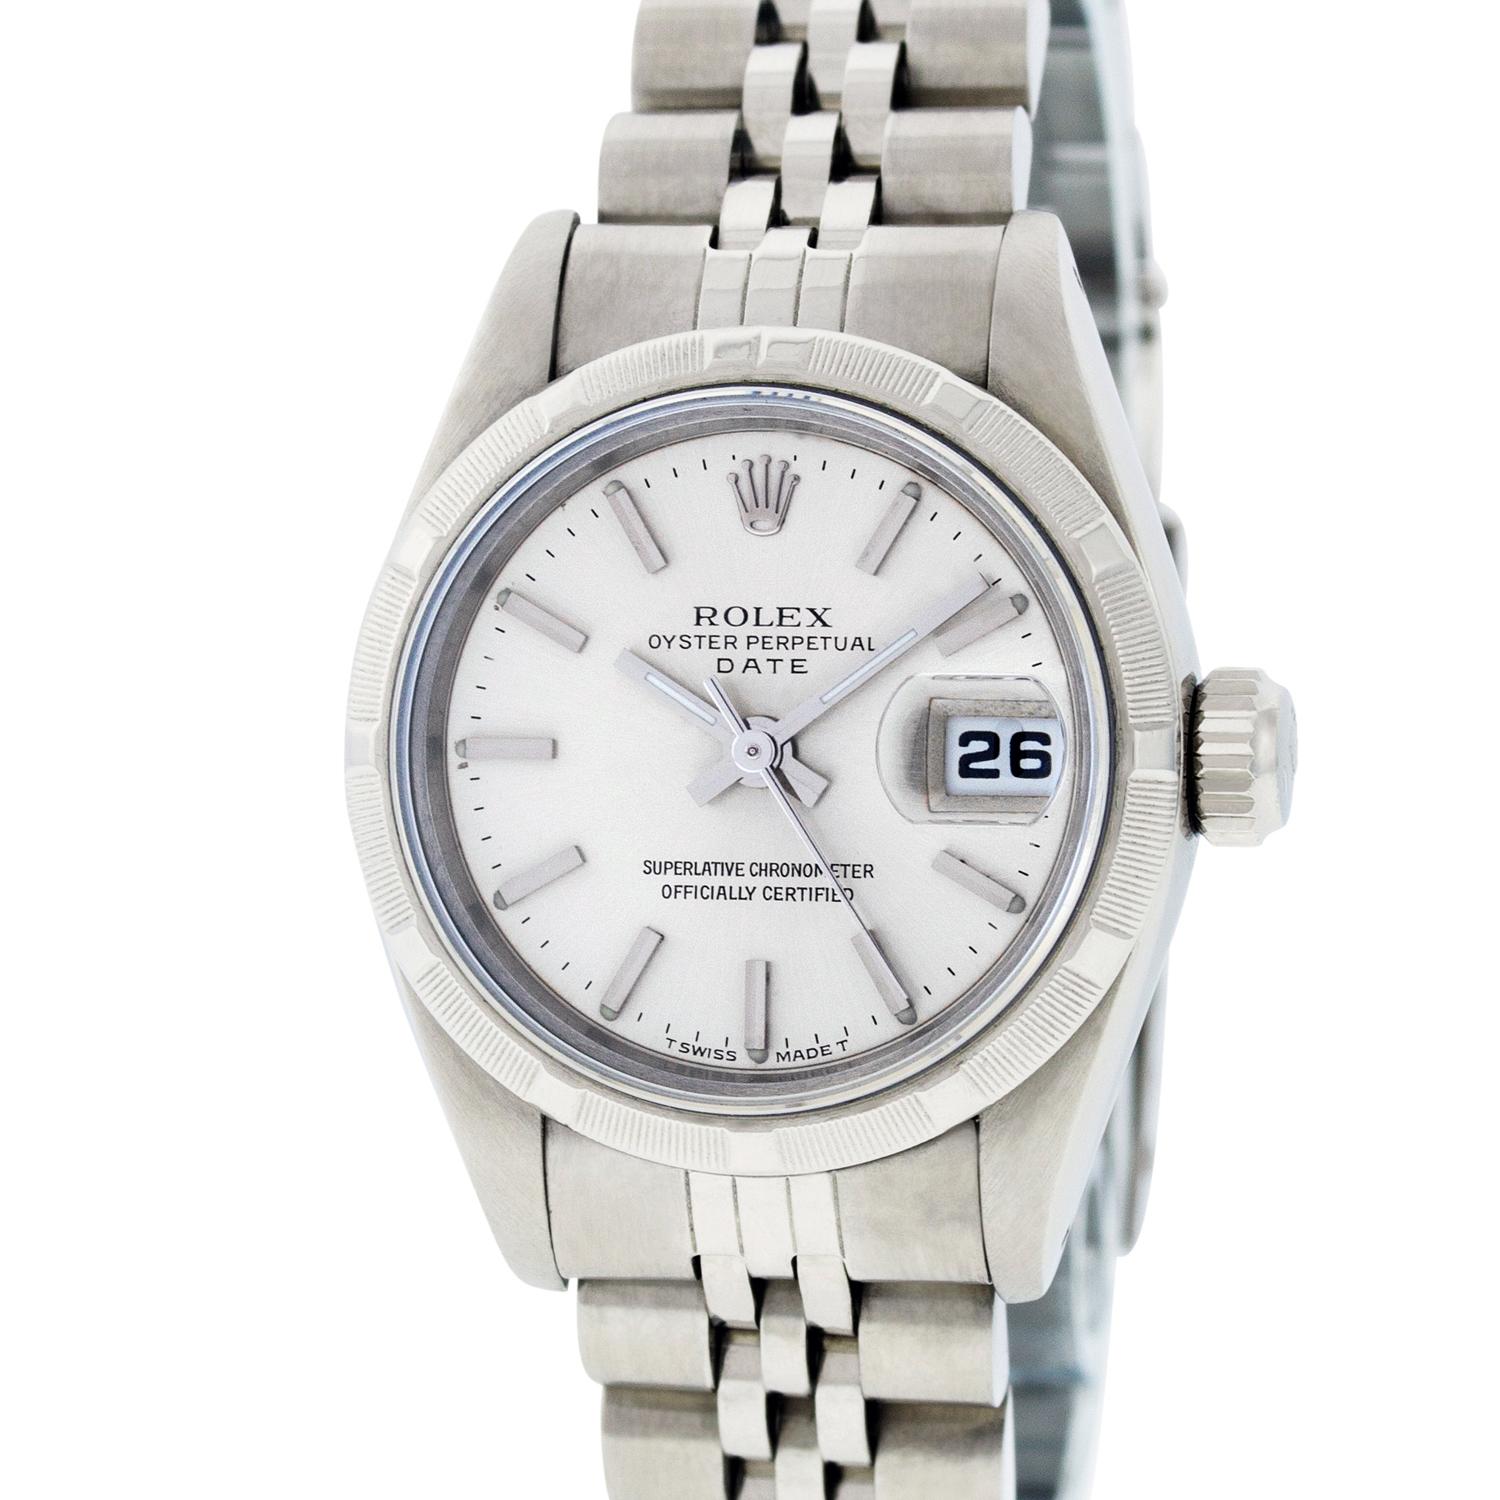 Pre-Owned Rolex Ladies Datejust Stainless Steel Watch Silver Index Dial with Engine-Turned Bezel

WATCH DESCRIPTION

BRAND  -  Rolex

MODEL  -  Datejust

CASE SIZE   -  26mm

GENDER  -  Women's

CASE  -  Rolex Stainless Steel Case

WATCH